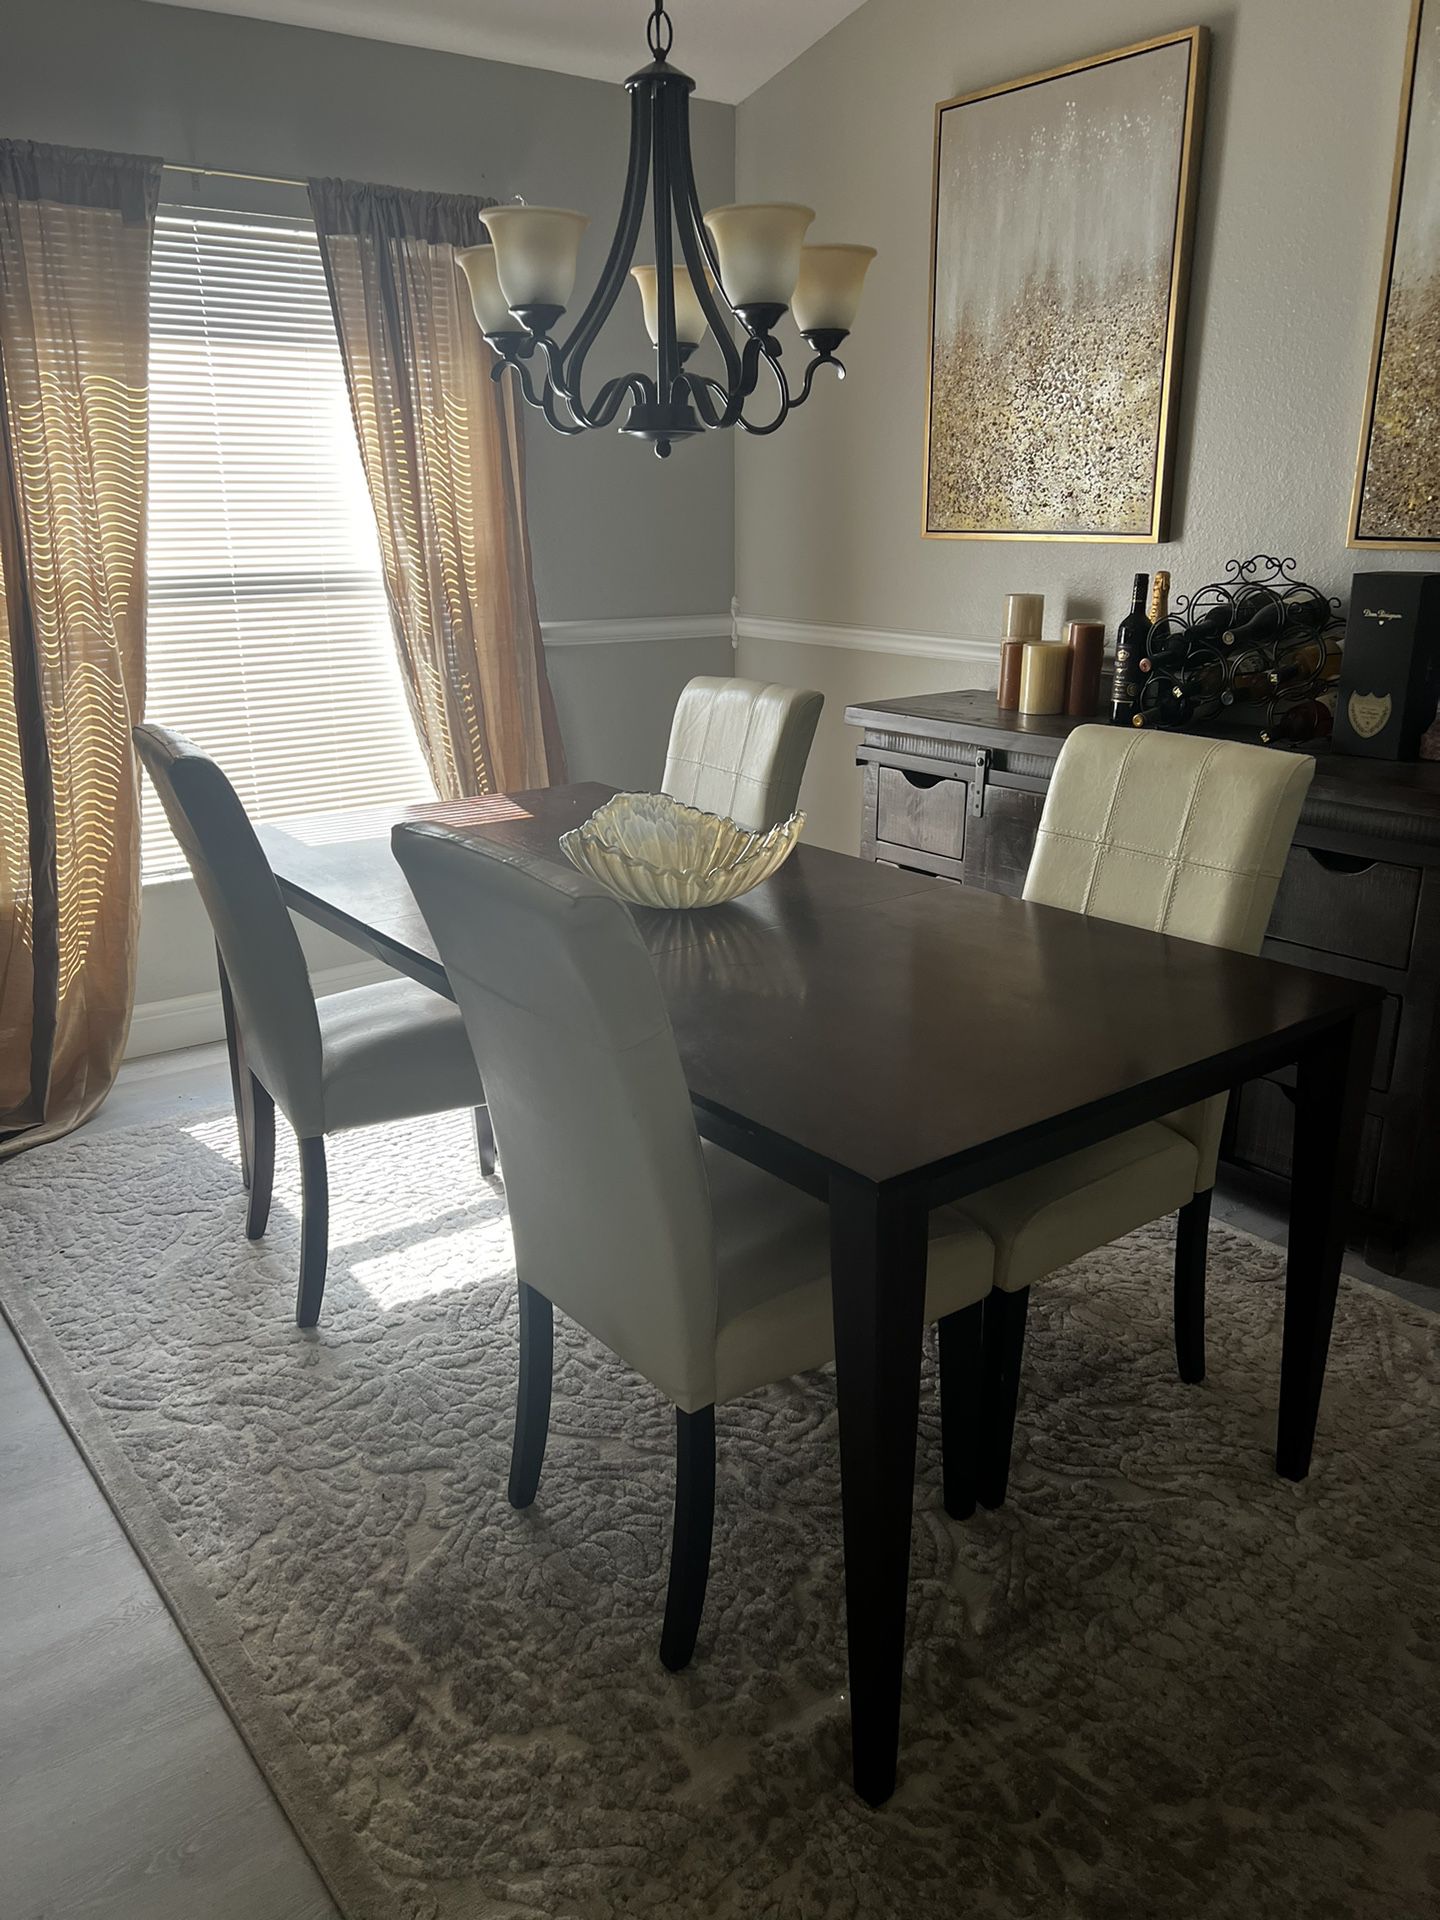 Pier 1 Imports Table w/ 4 Chairs